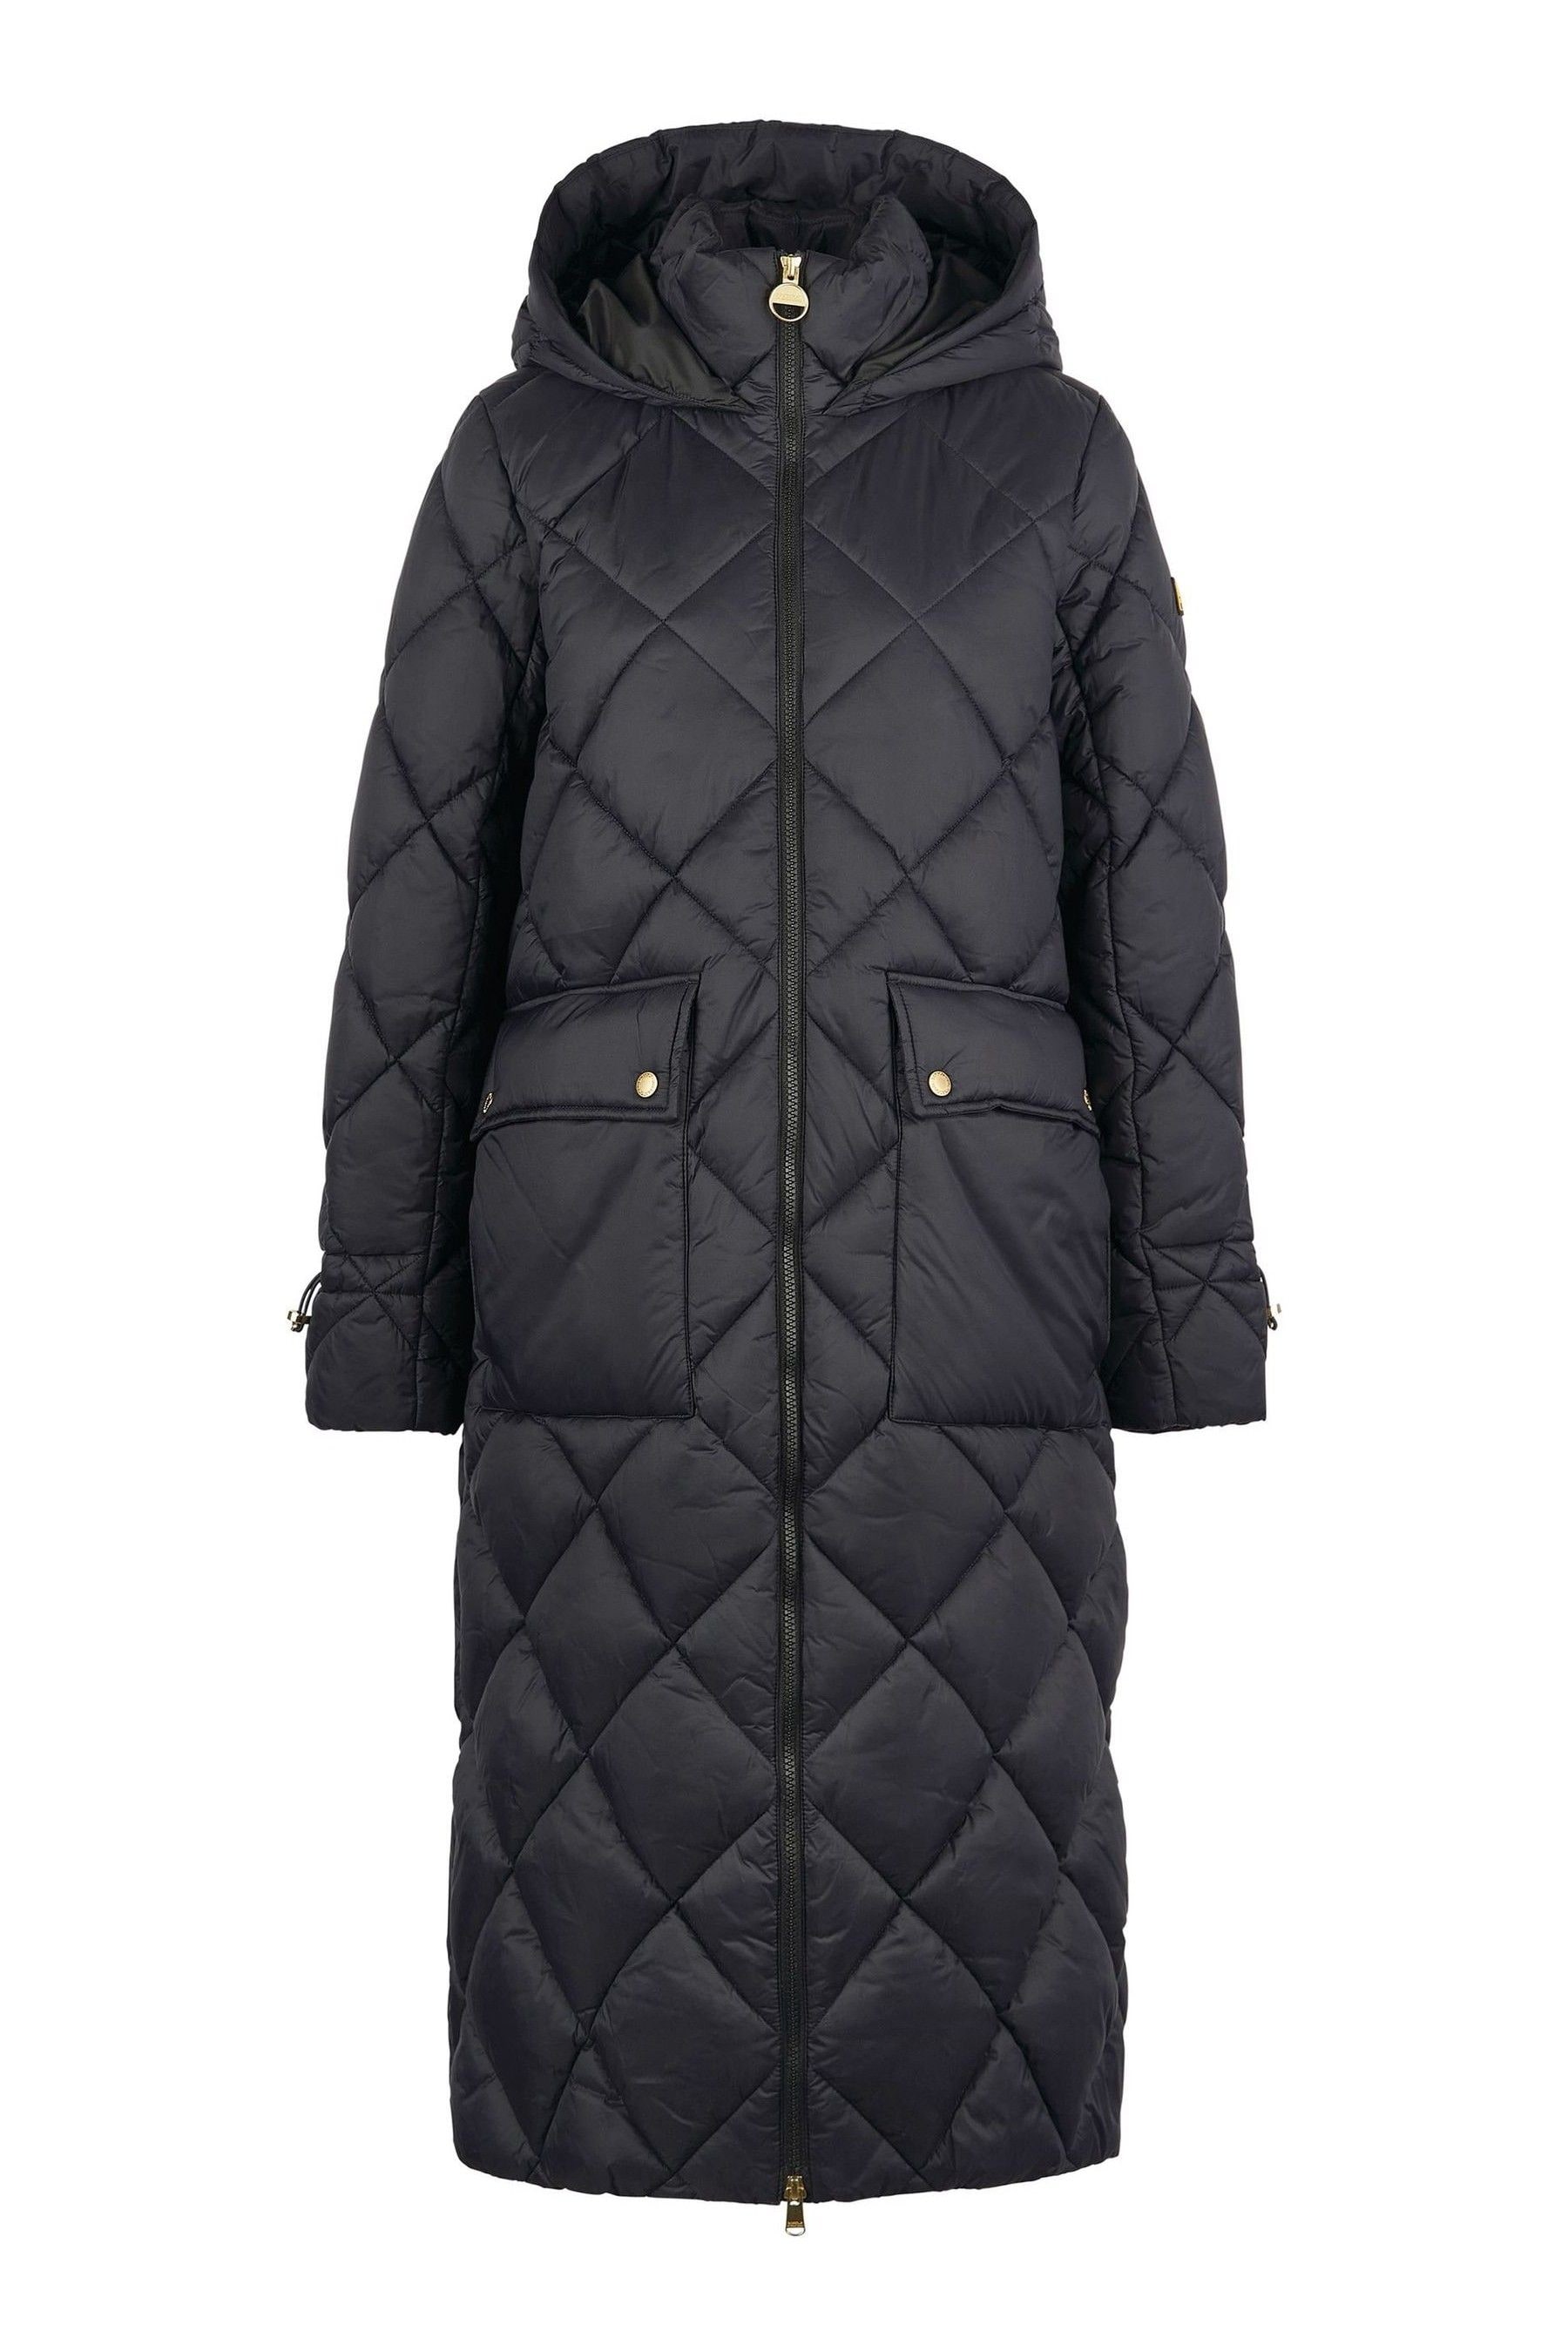 Buy Barbour International® Boulevard Longline Quilted Black Jacket from ...